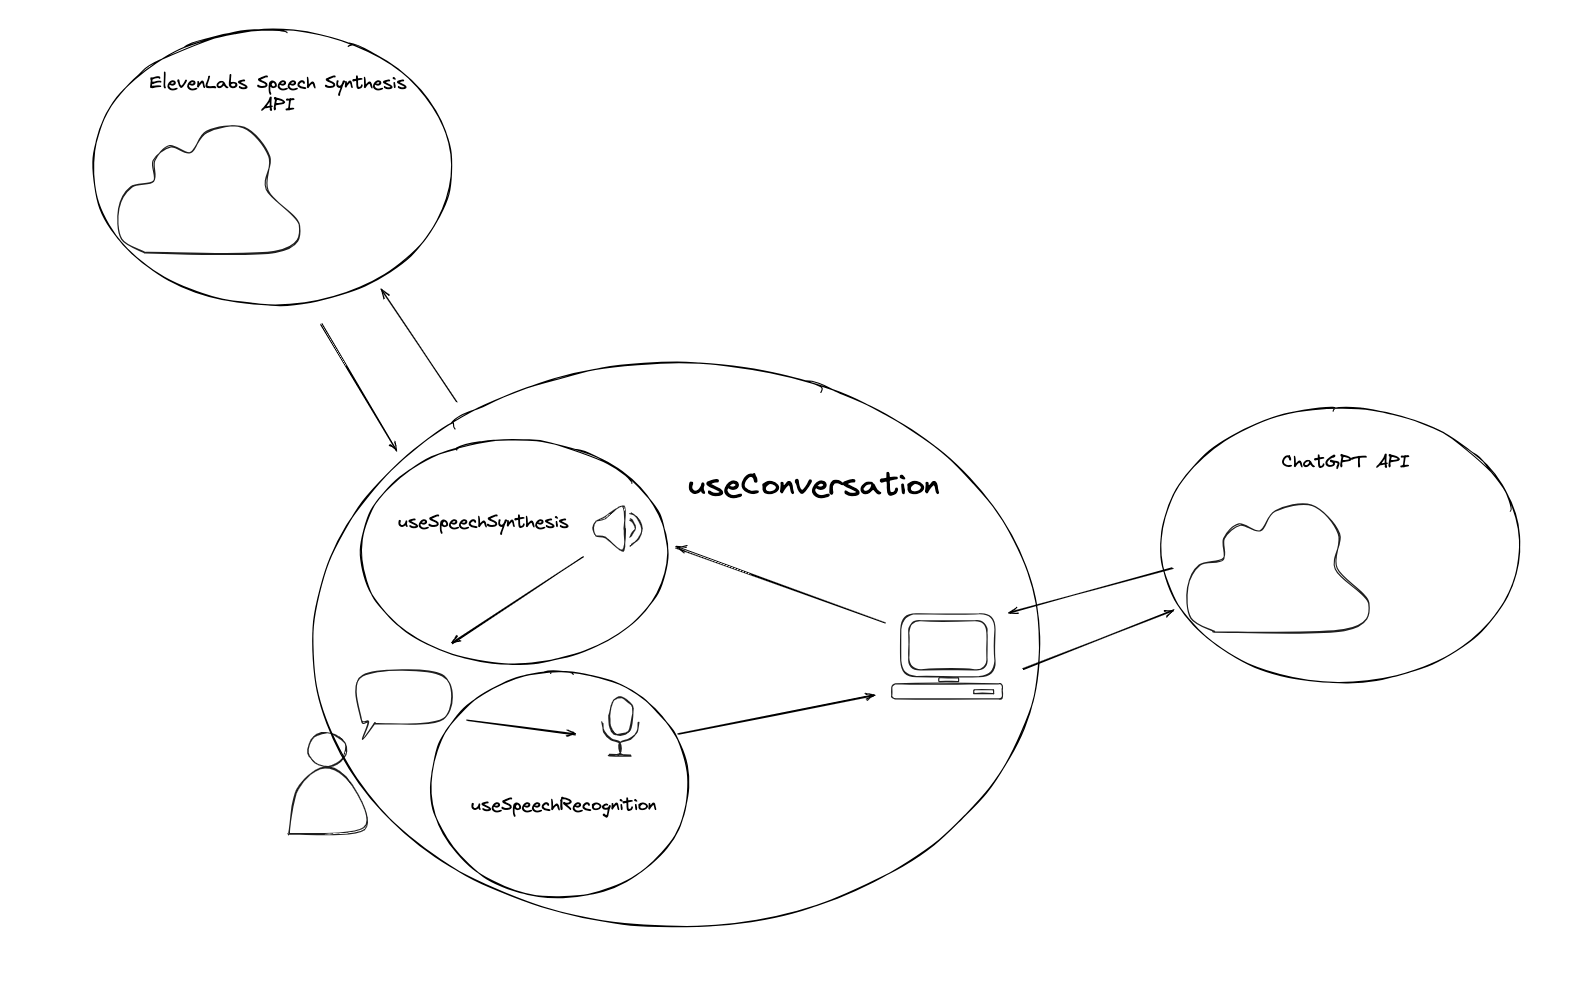 Schema showing the turn based conversation flow of Aiva with sidestep to the ElevenLabs API